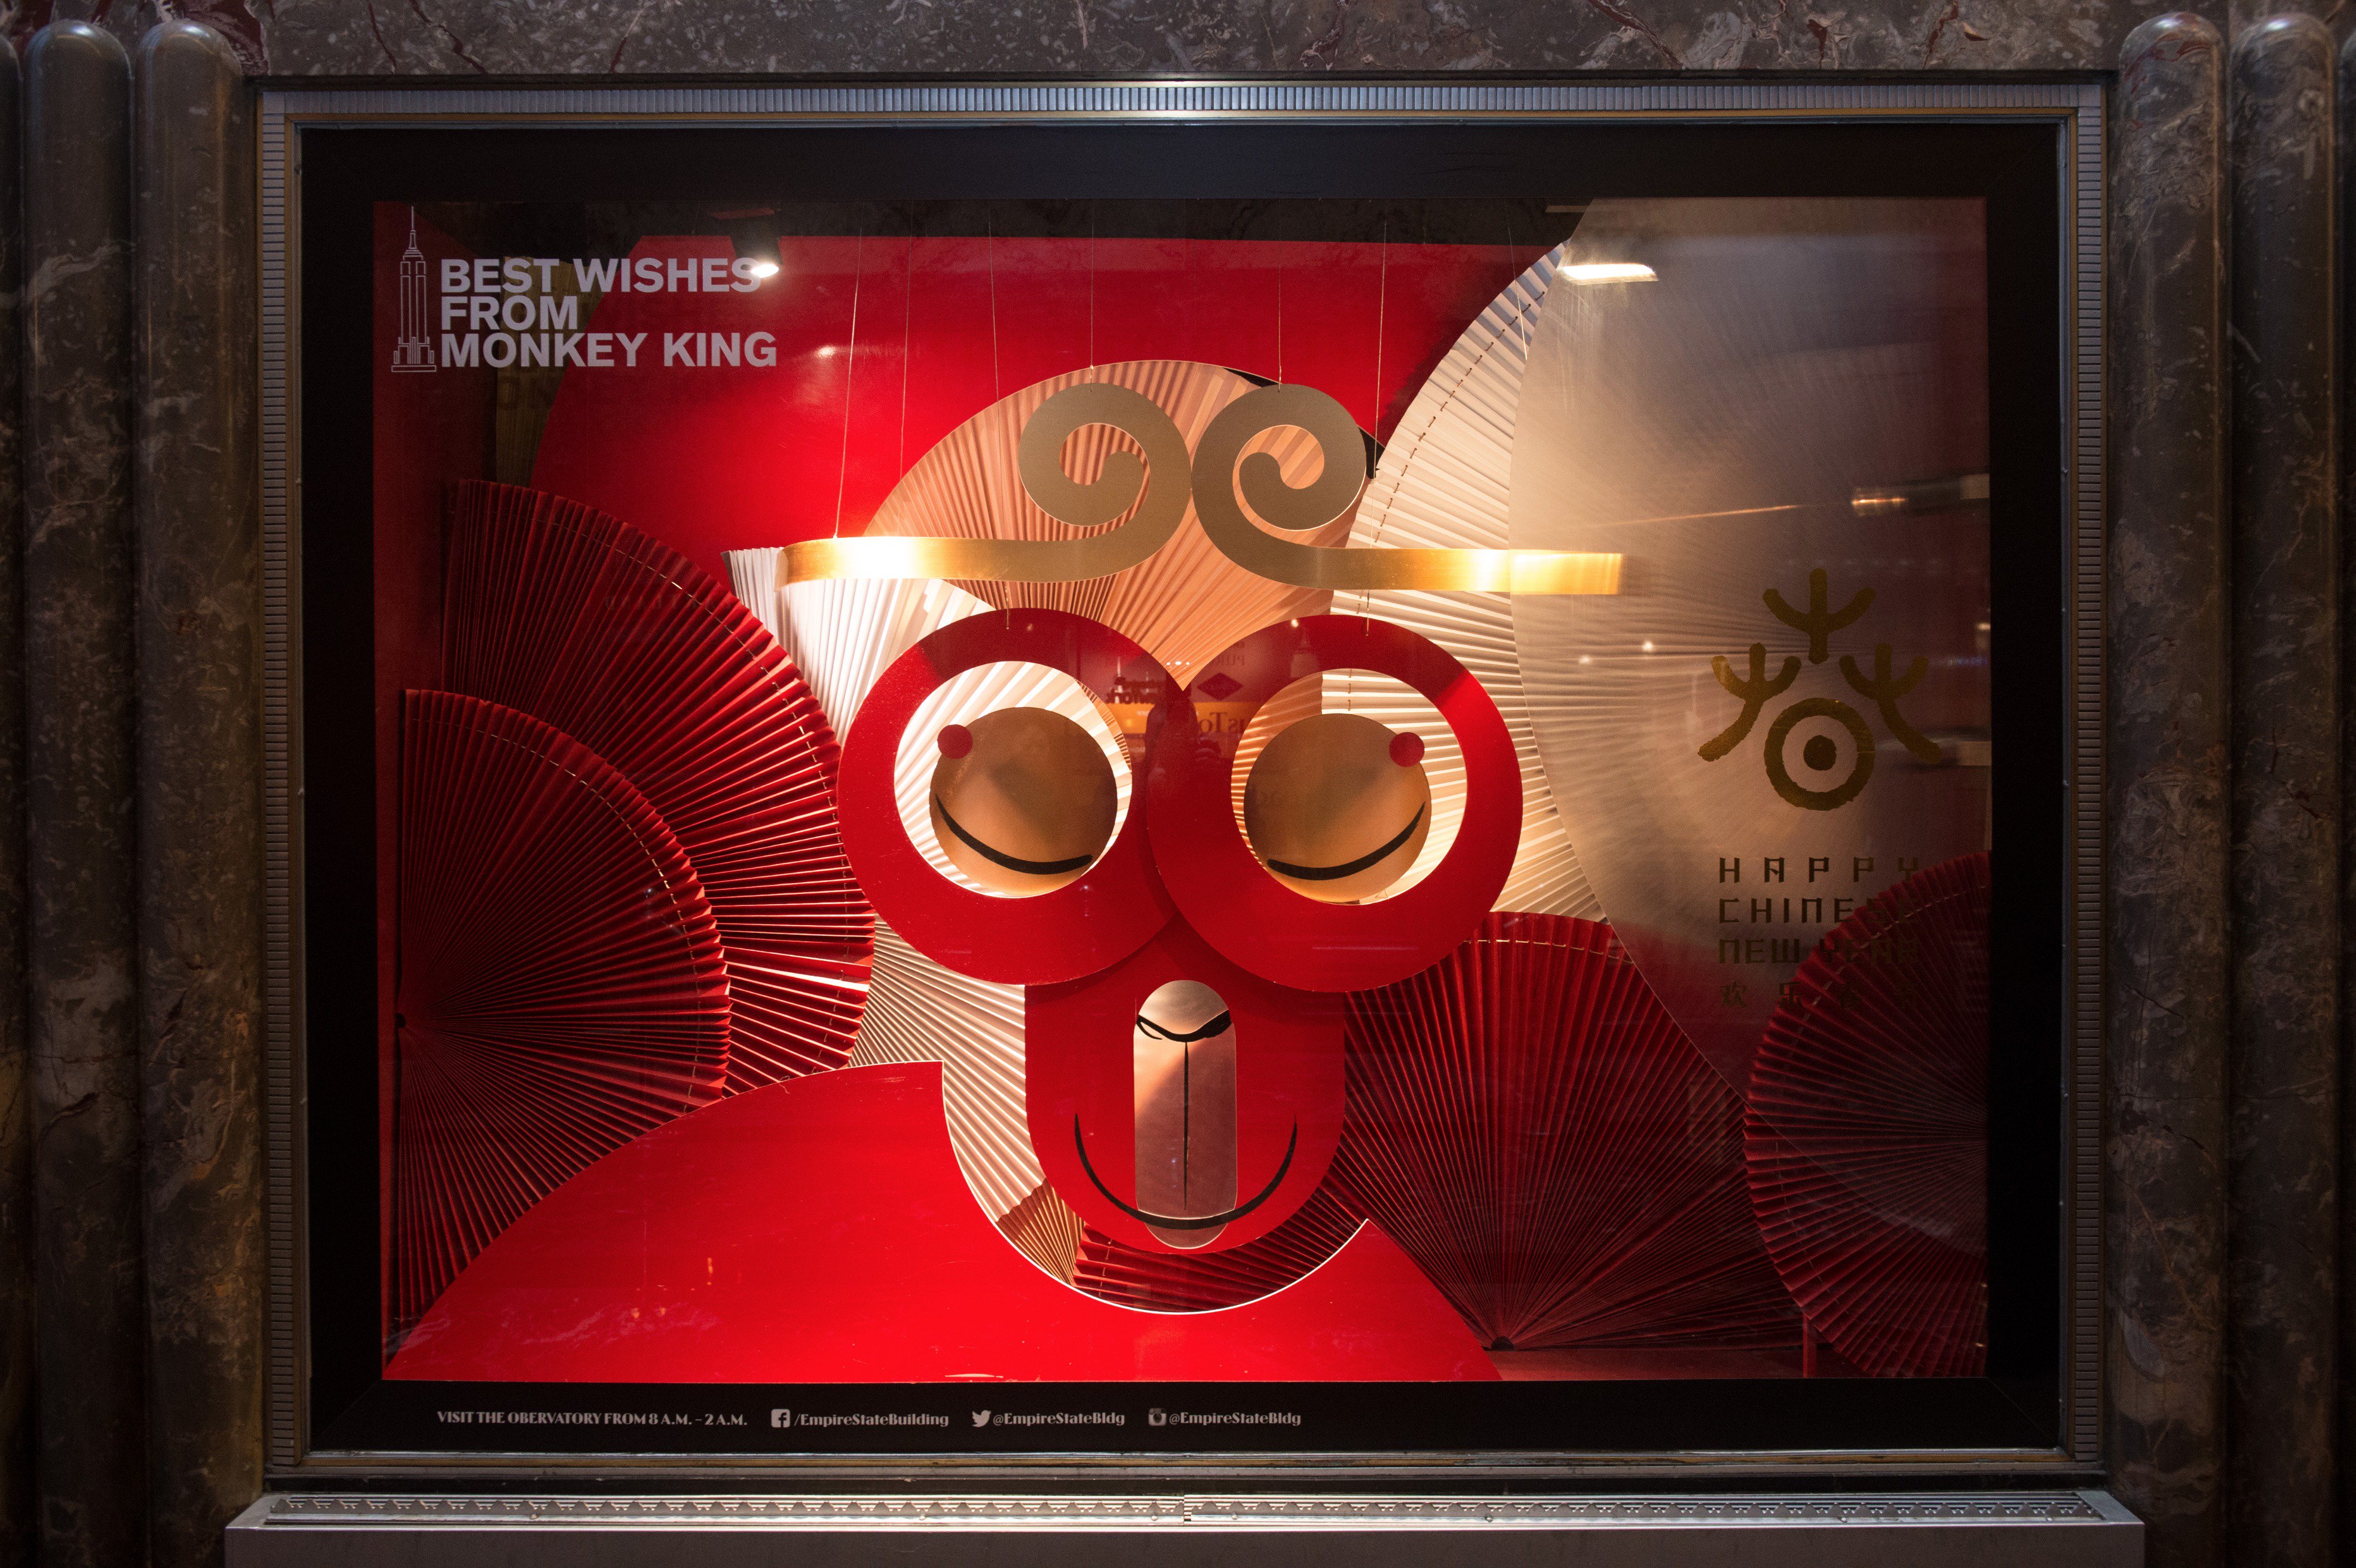 Empire State Building on X: We just revealed a brand new window display in  our 5th Ave lobby to honor the Lunar New Year & Year of the Monkey!   / X